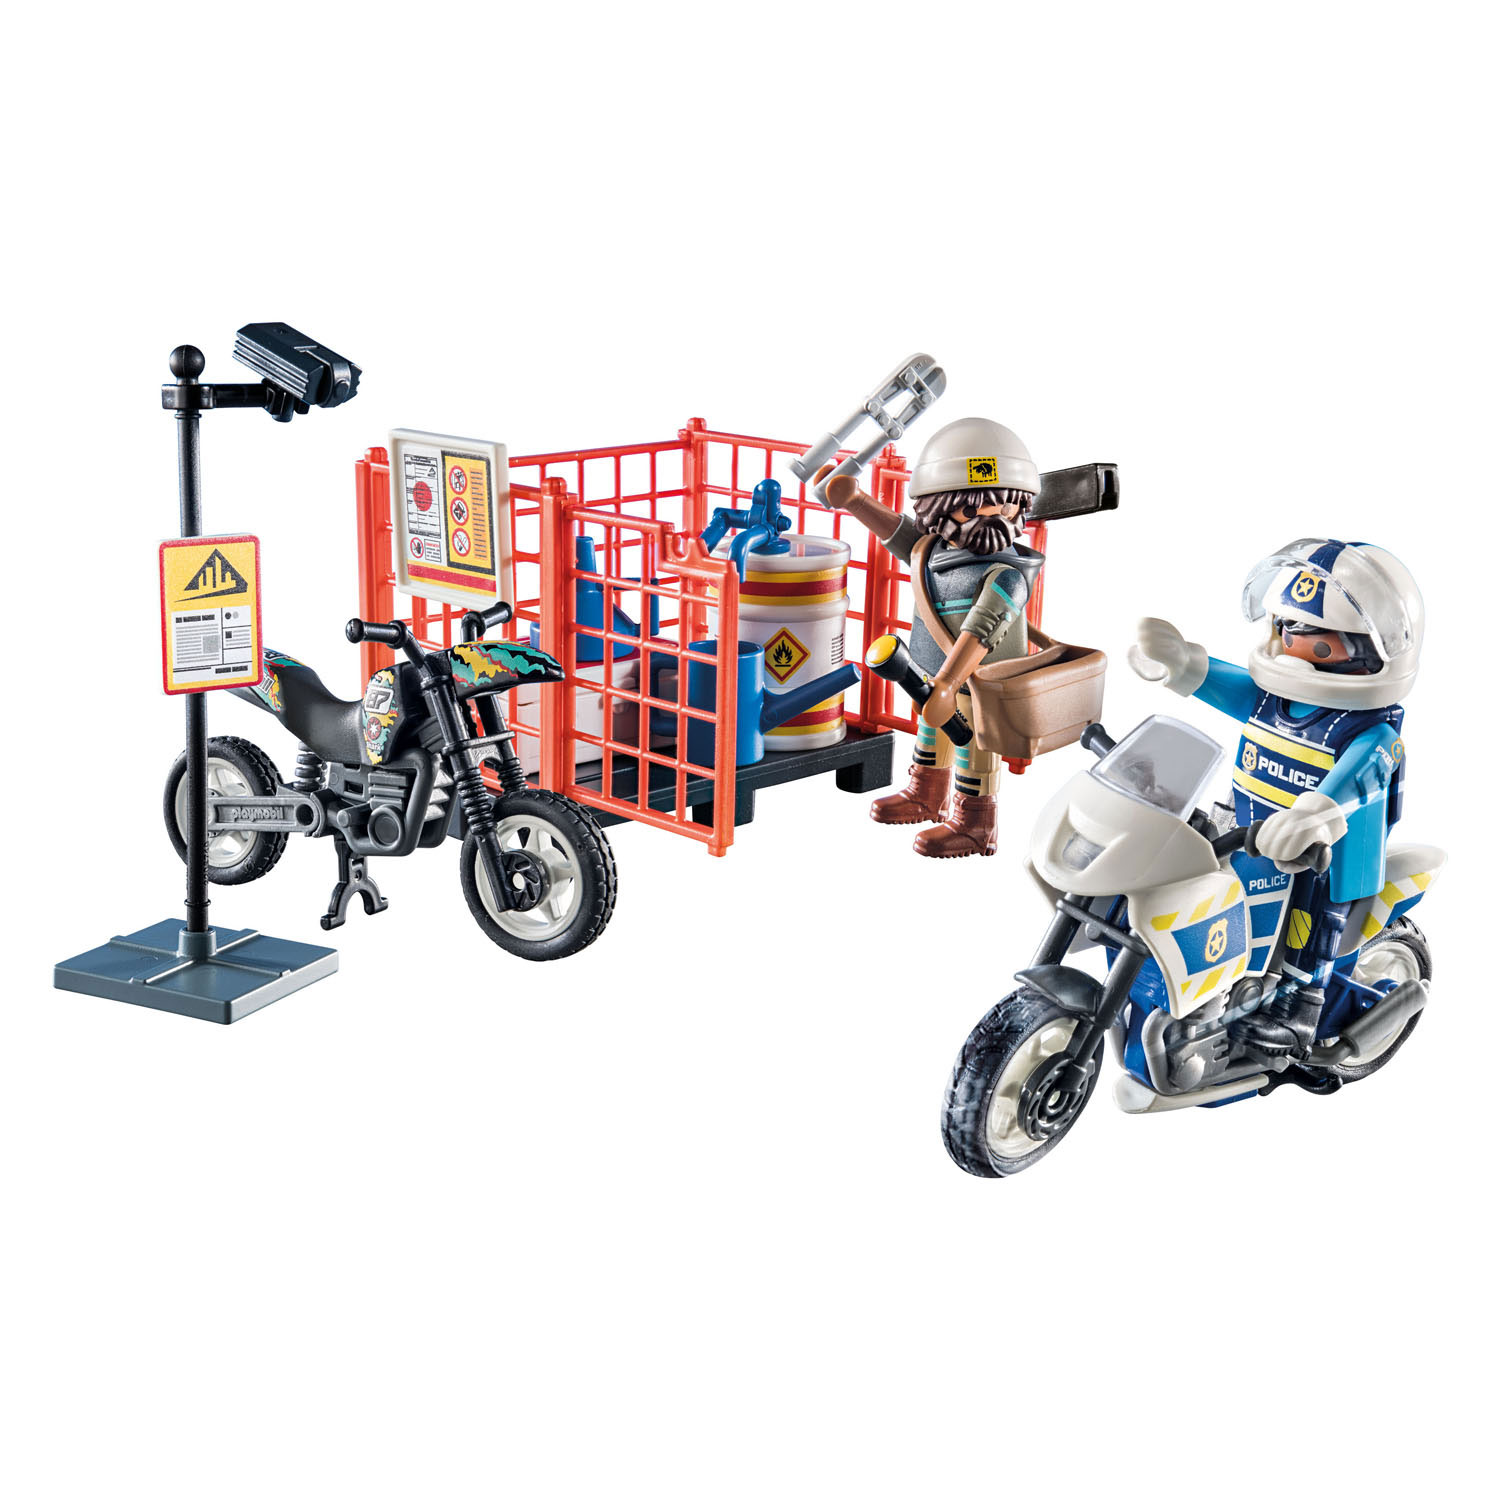 Playmobil City Action Starter Pack Police - 71381